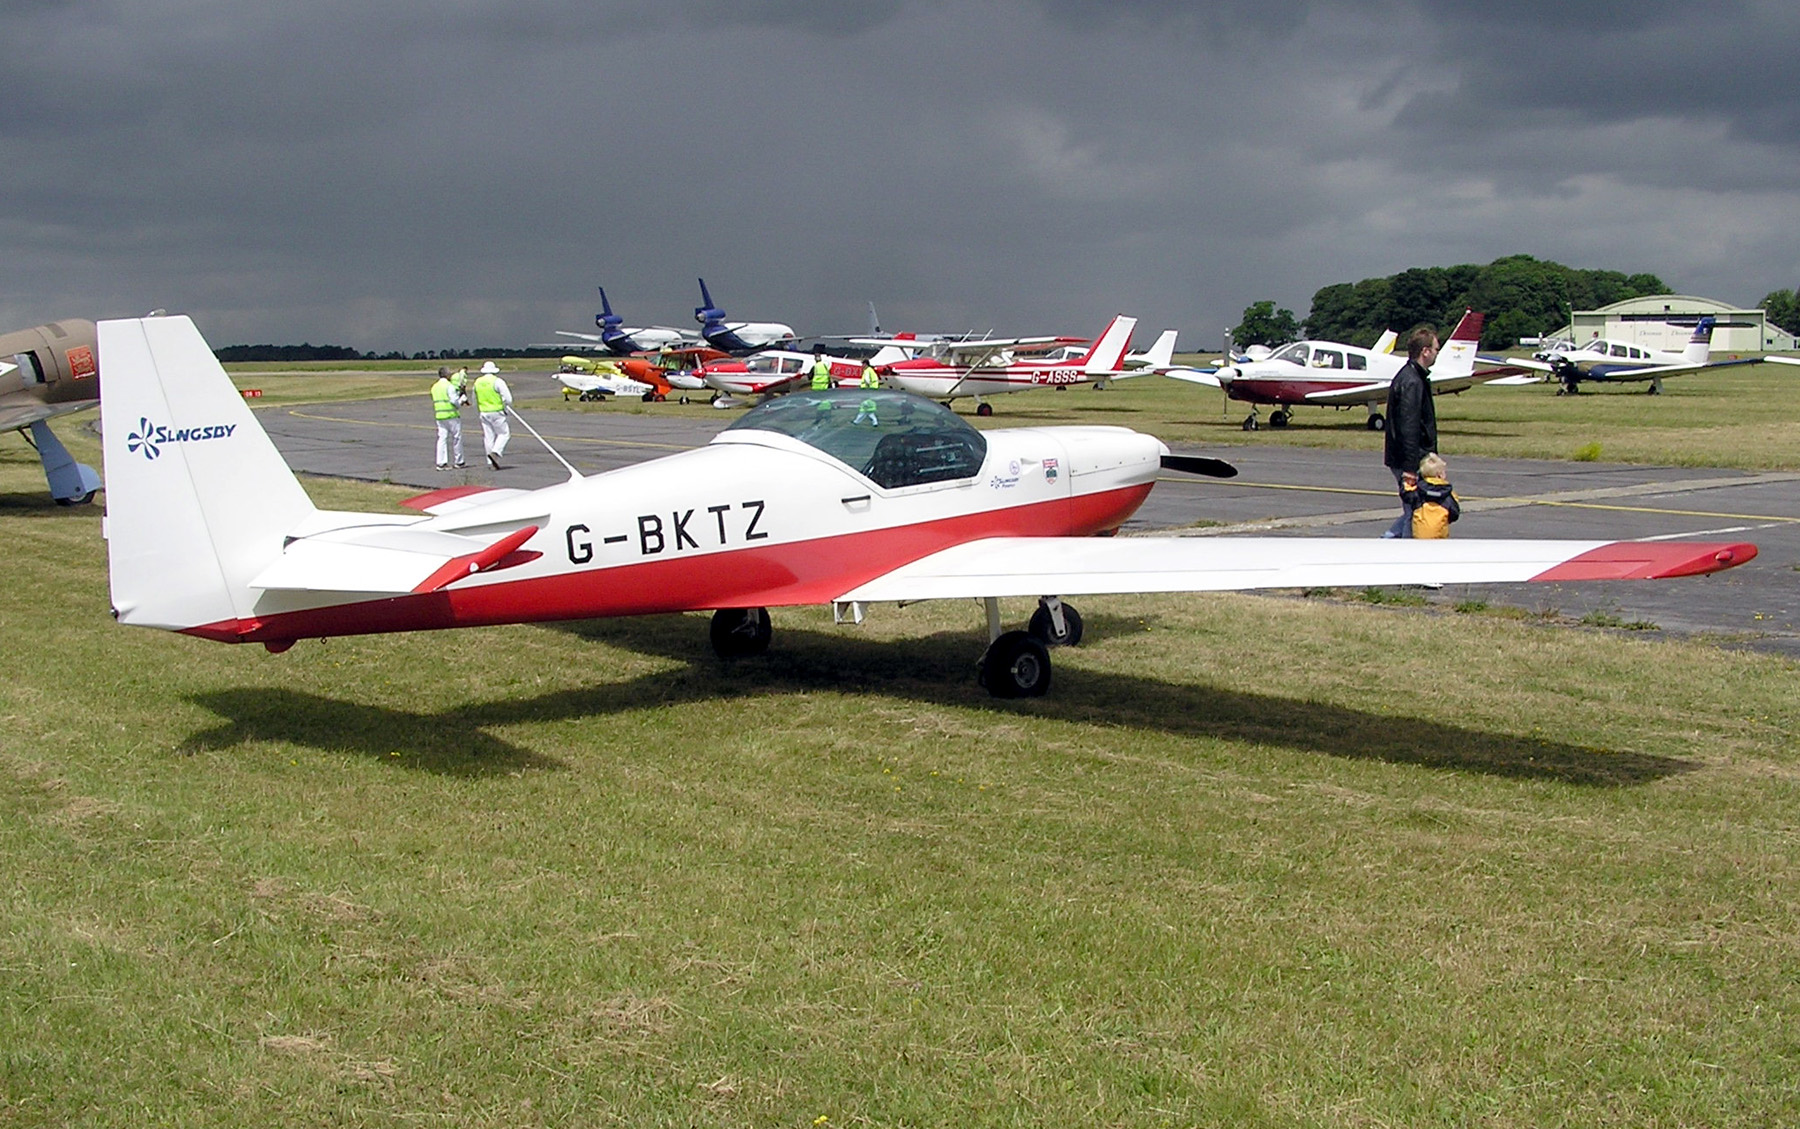 Slingsby T-67 Firefly next